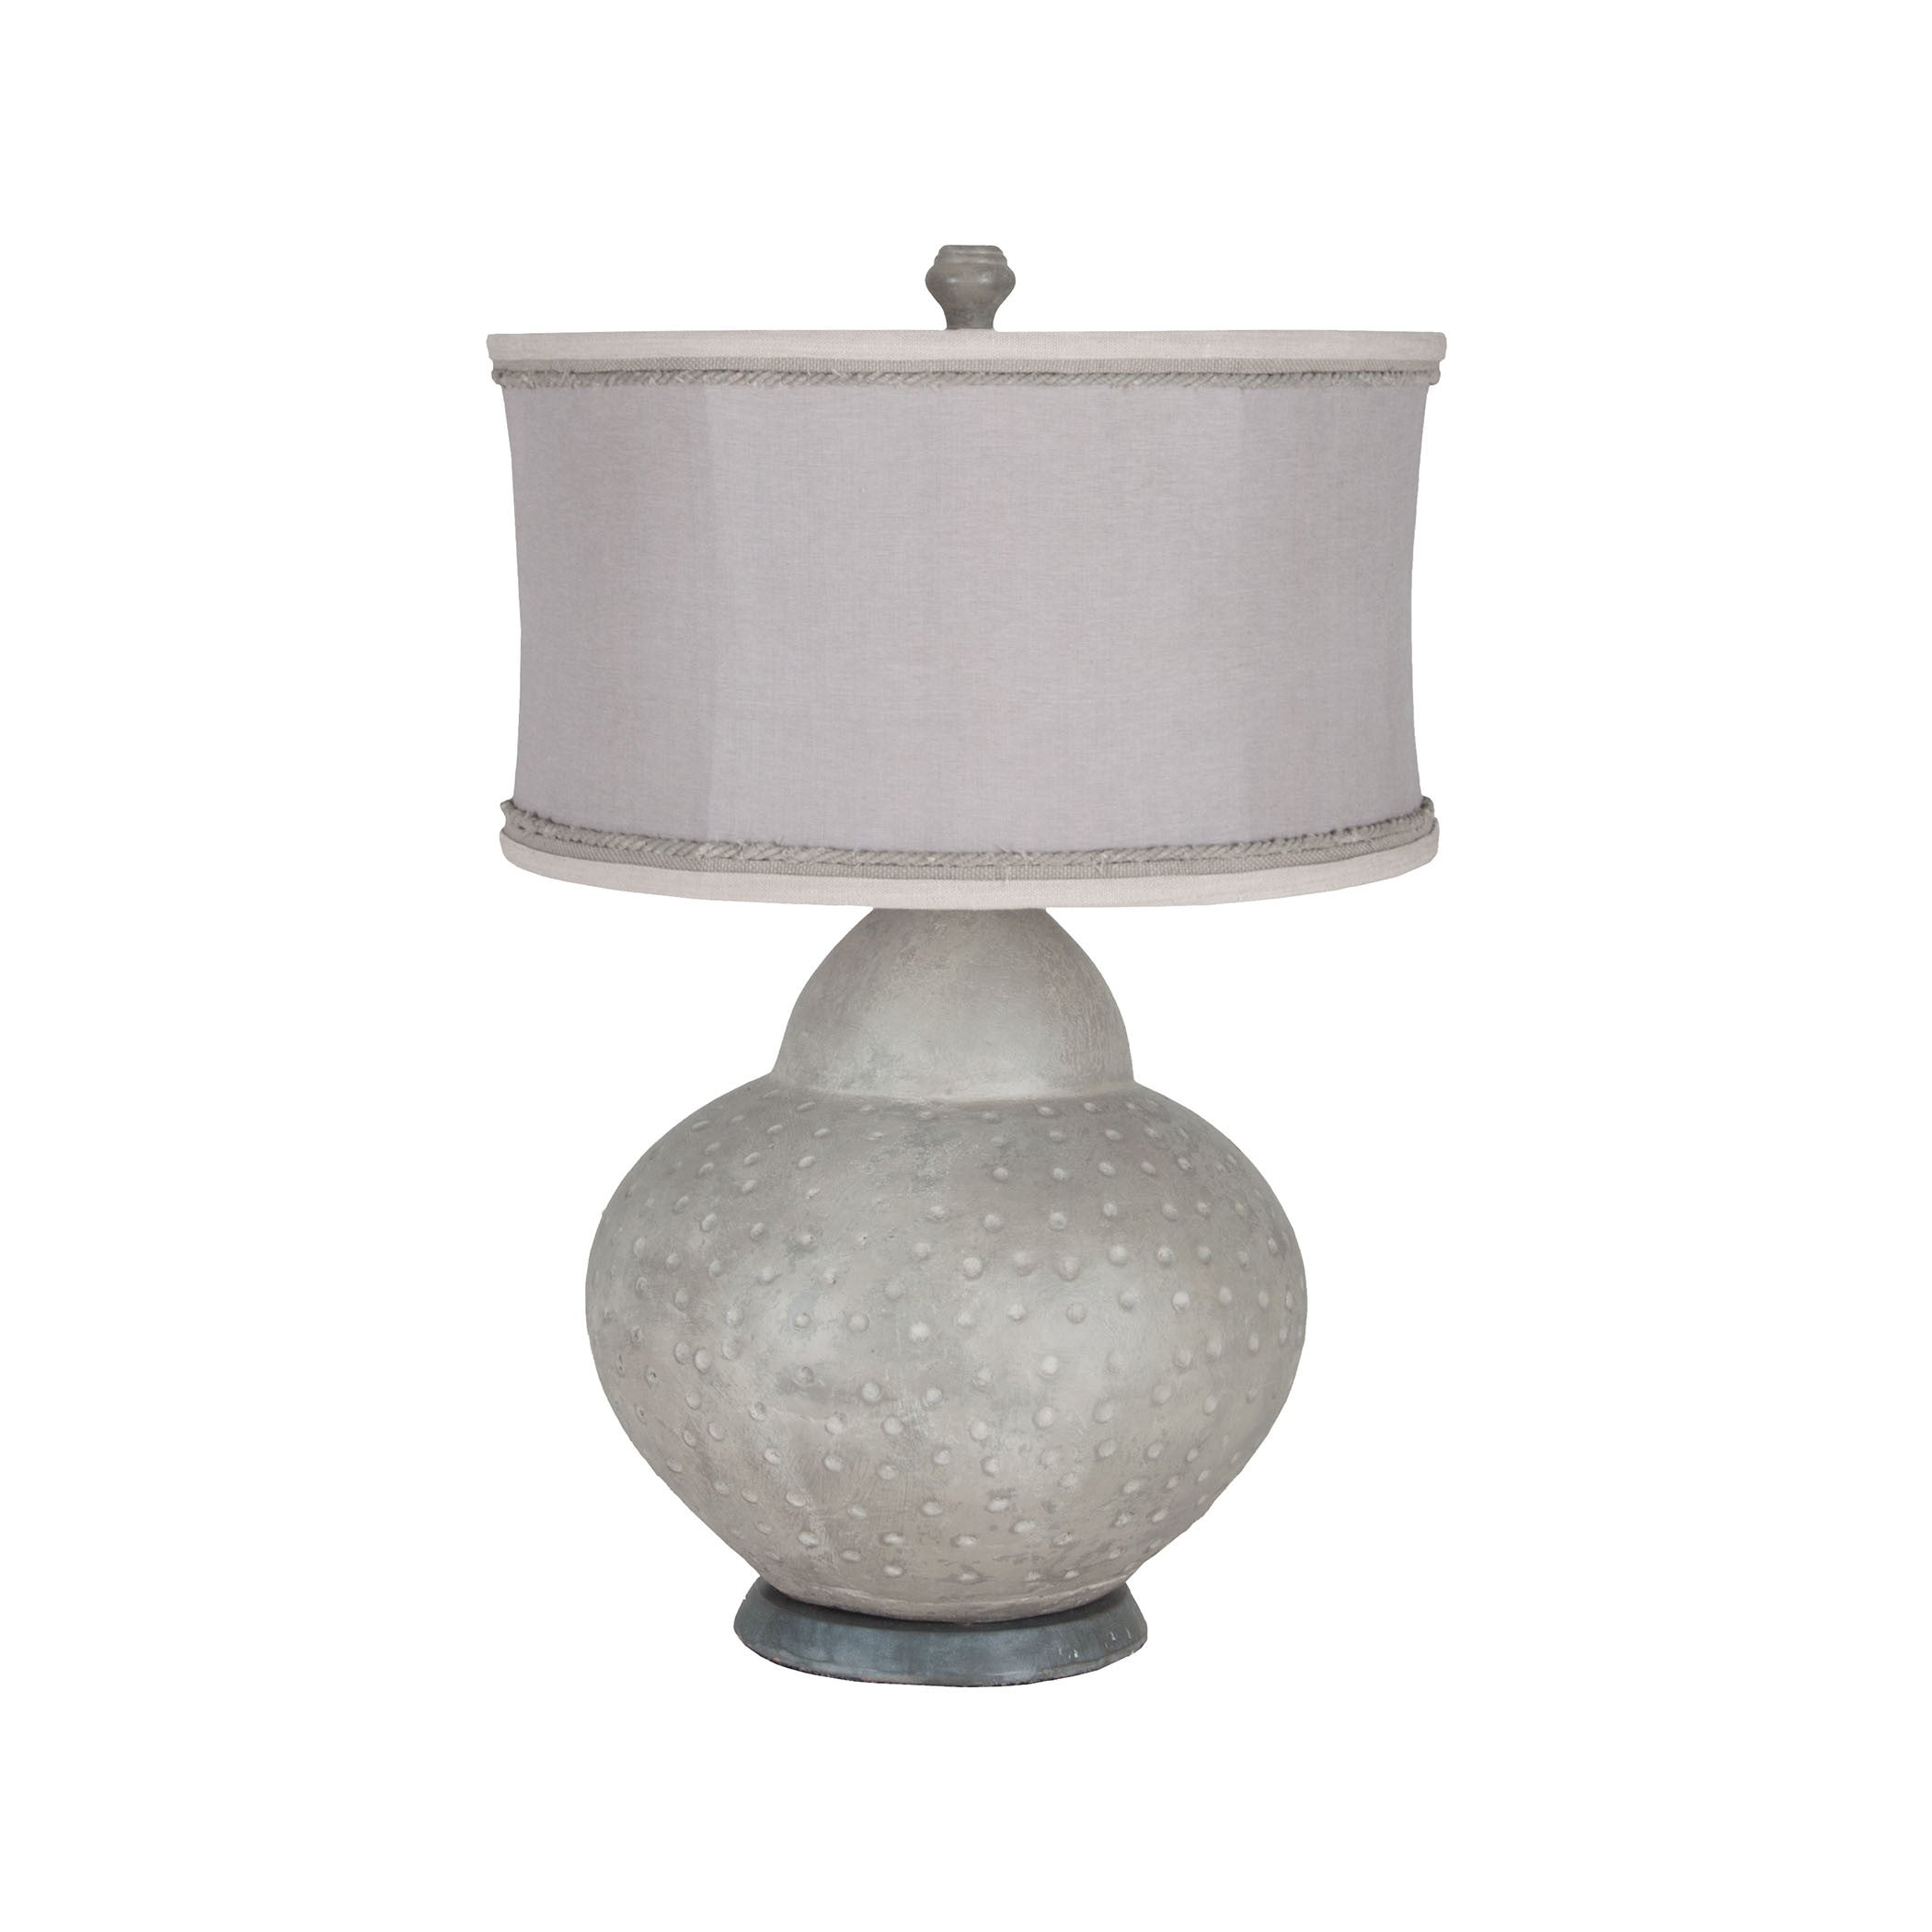 Guildmaster Gui-3516003 Terracotta Lamps Collection Concrete,taupe,rope Finish Table Lamp